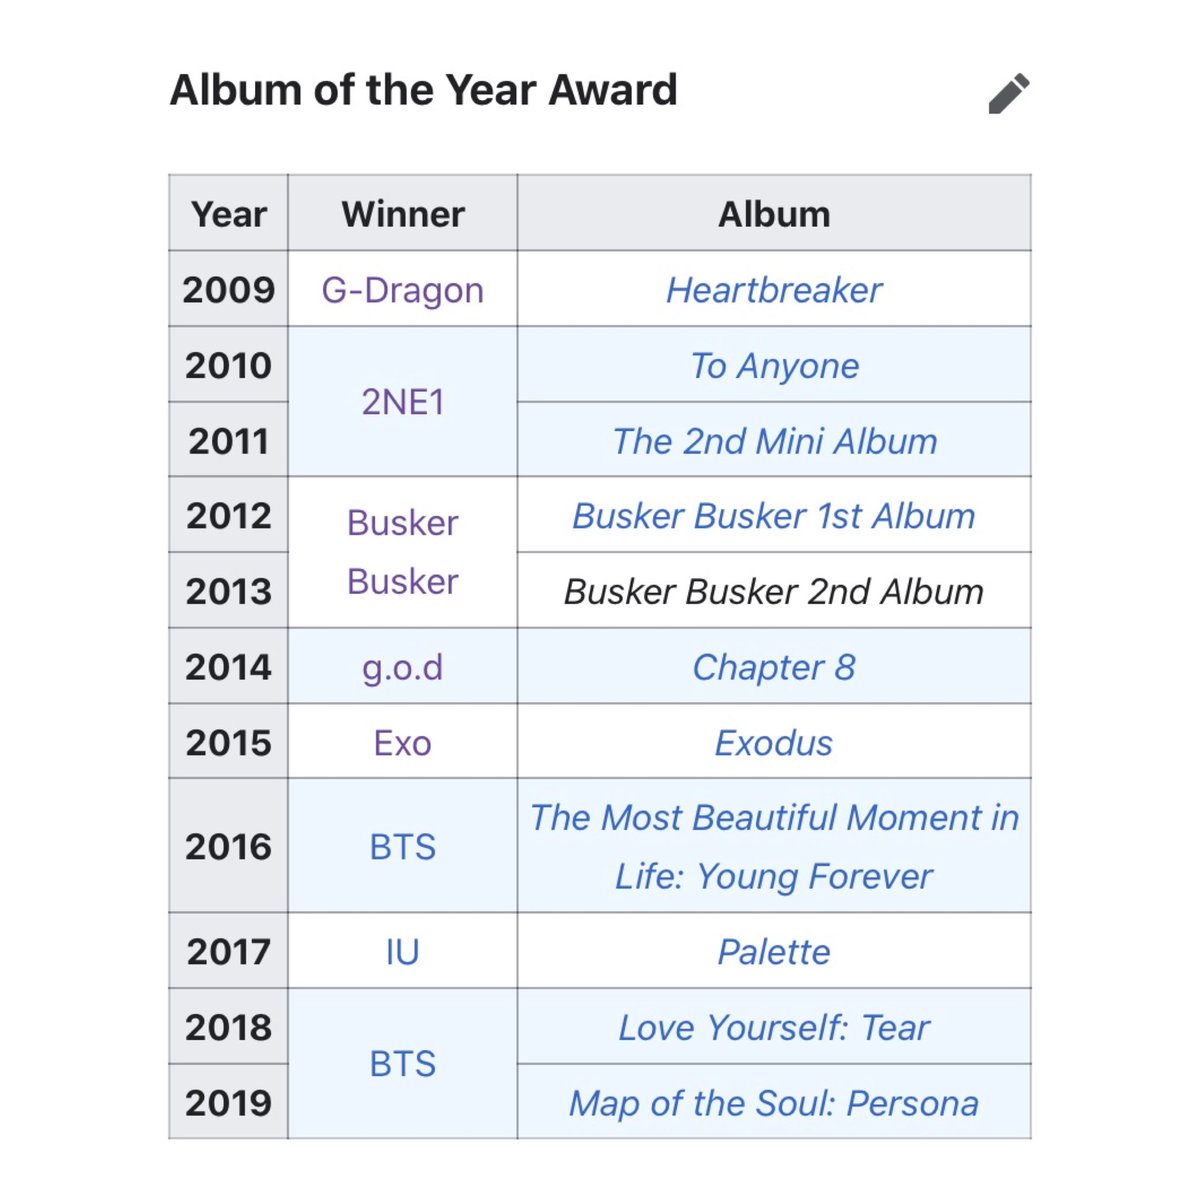 G-Dragon was the first solo artist to win Melon Album of the Year for 'Heartbreaker' in 2009. he hold this record until 2017, when IU became the second soloist to win that award.